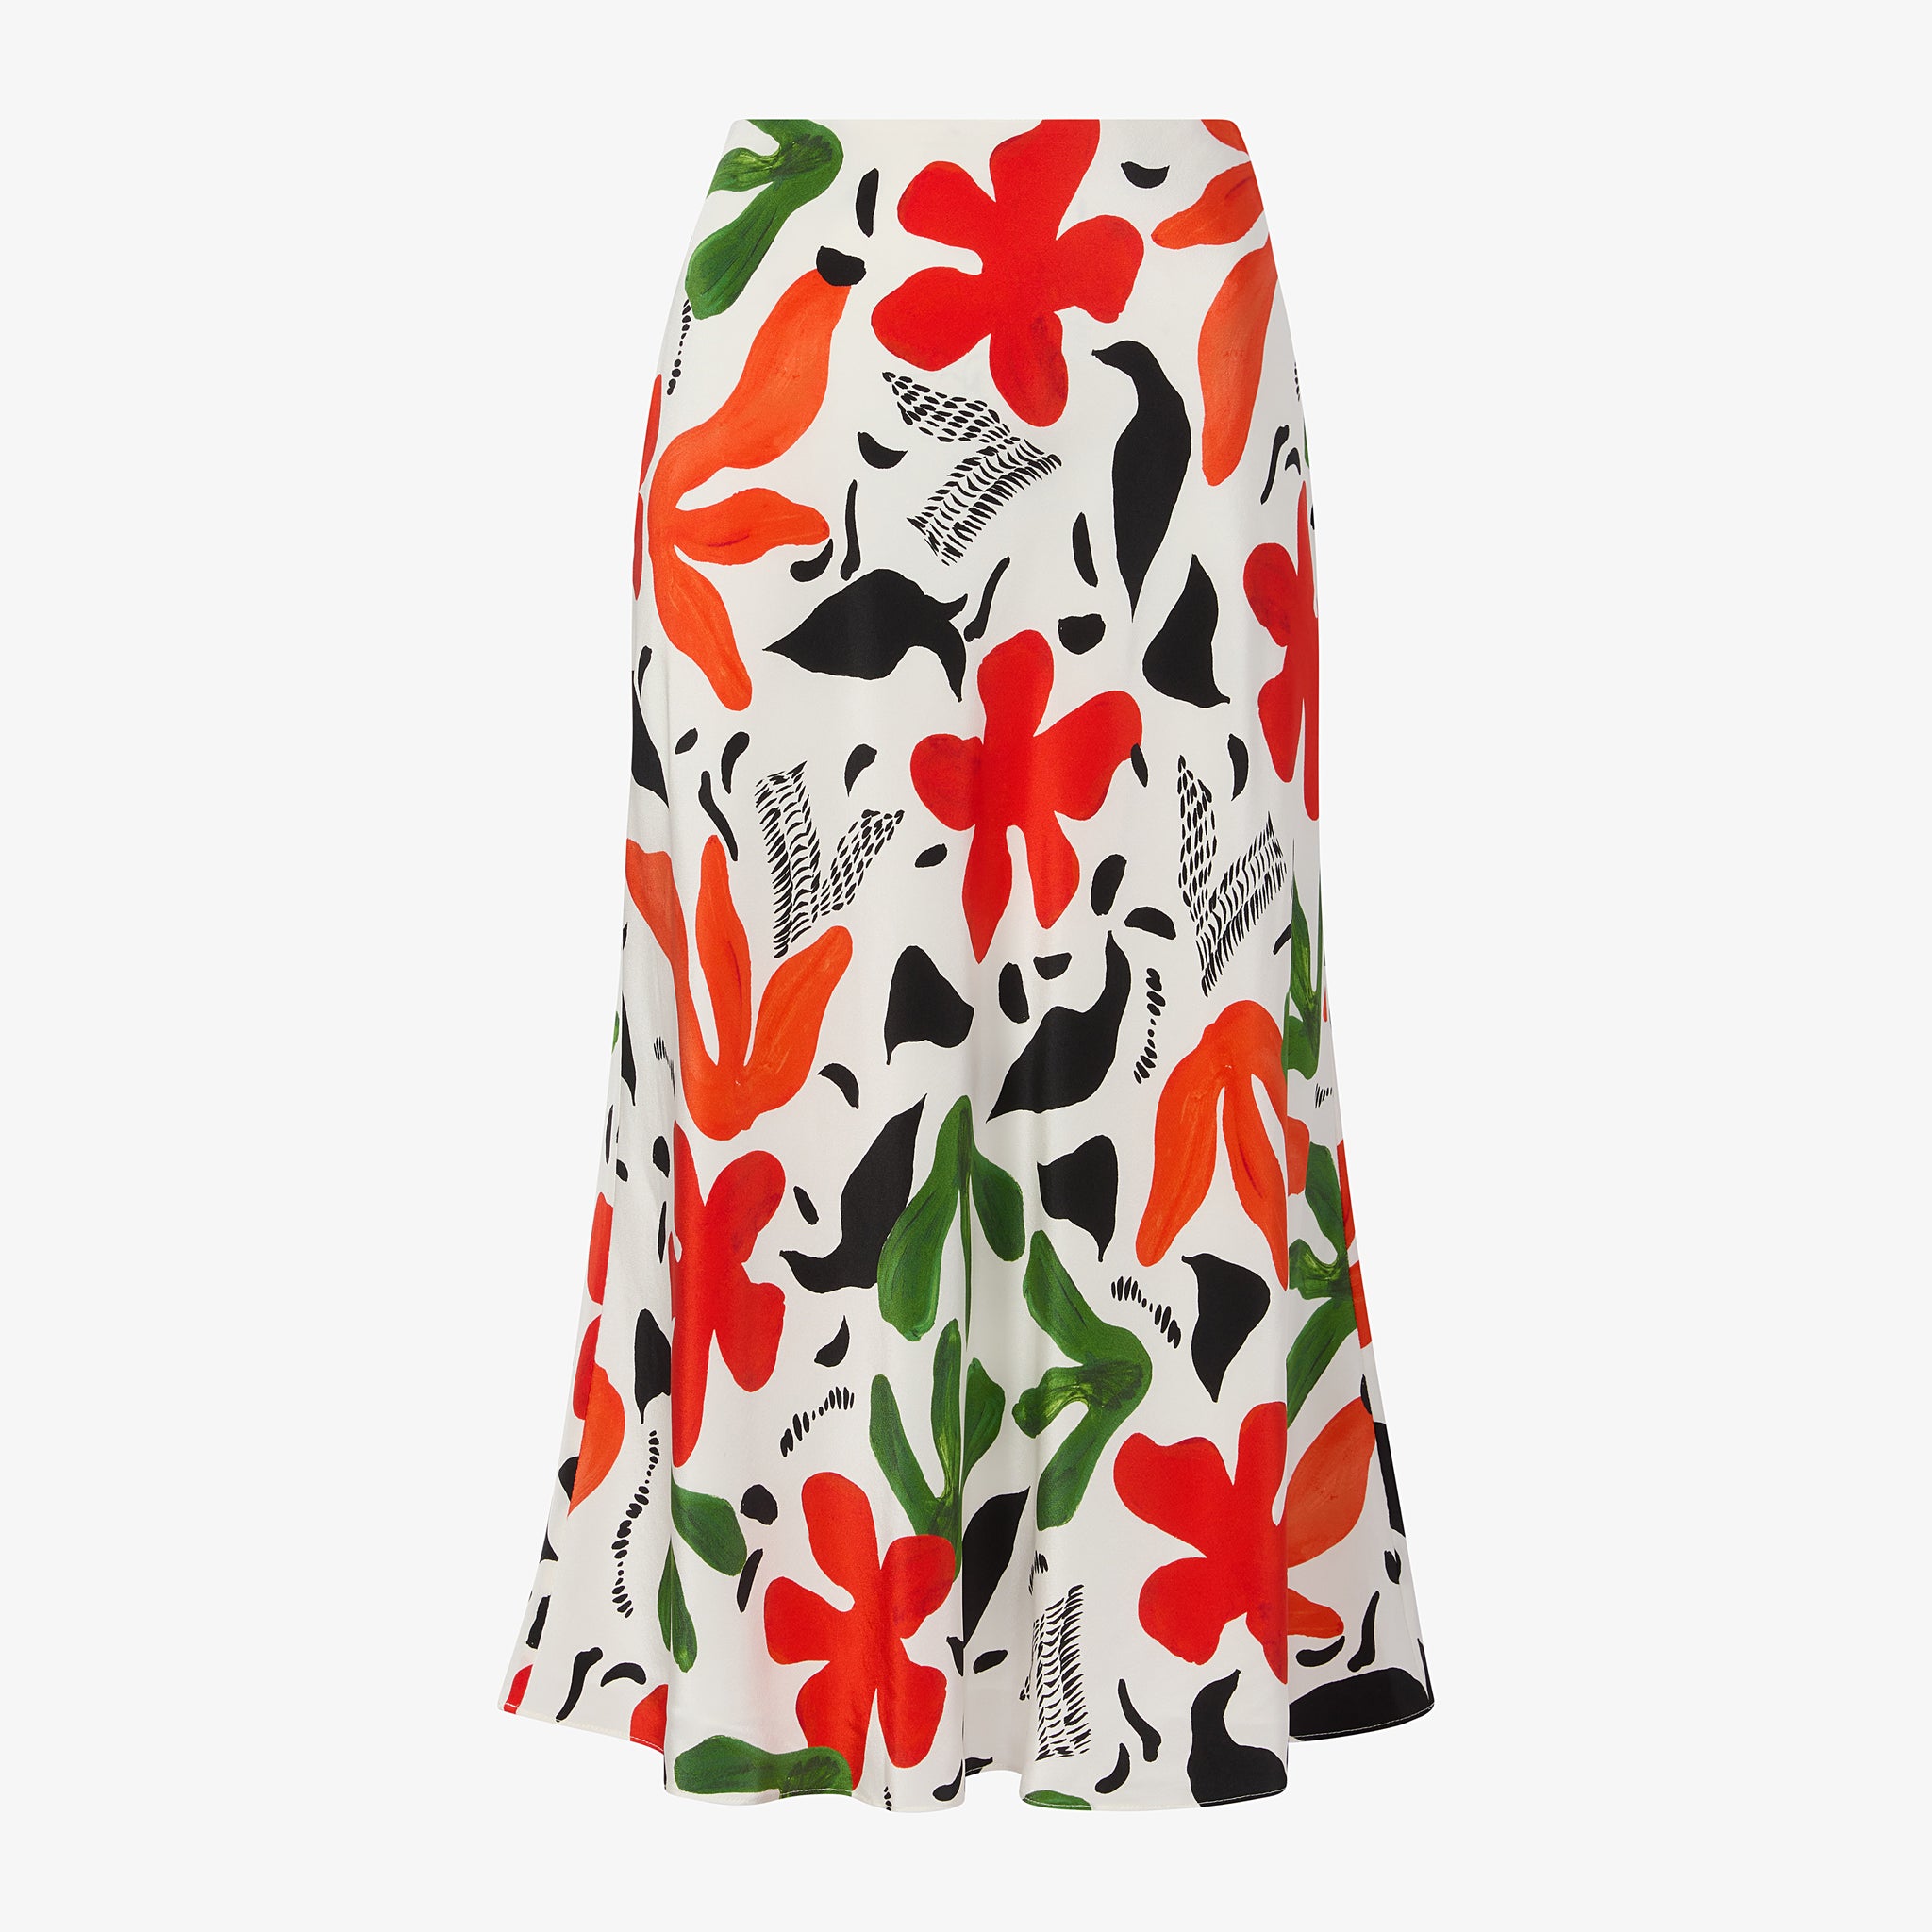 Packshot image of the Orchard skirt in cutout print